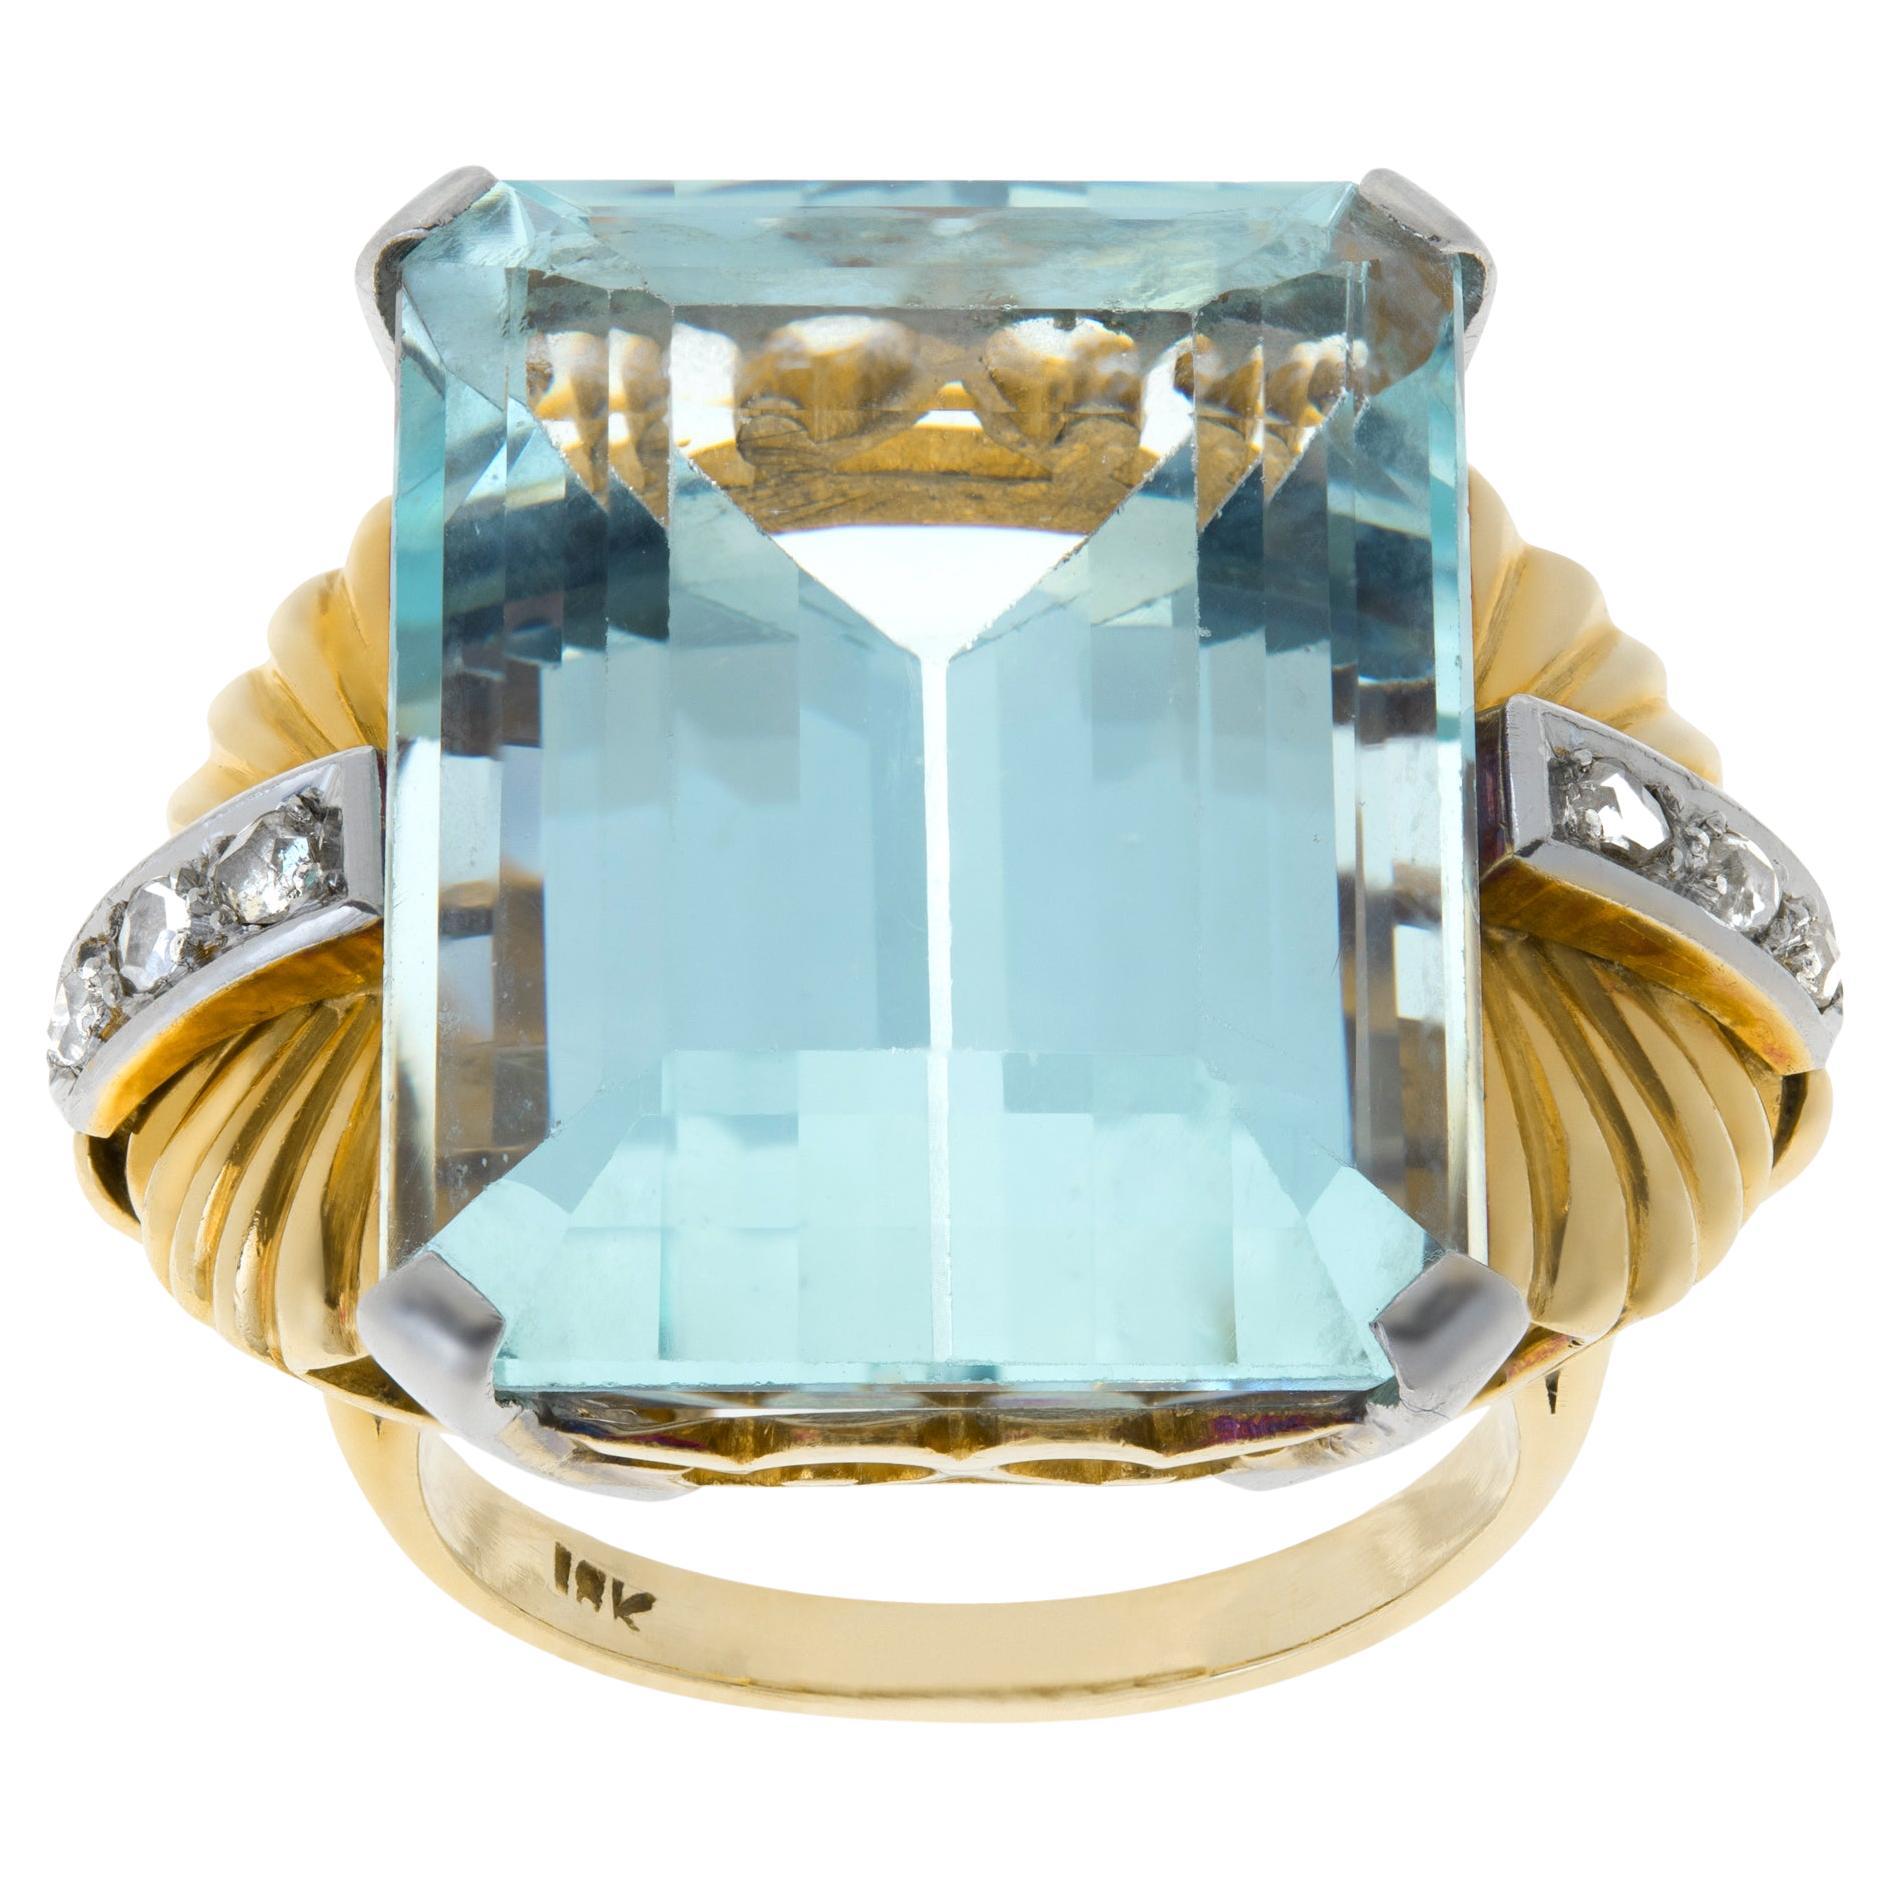 AGL certified Emerald cut Aquamarine approx. 30 carats set in yellow gold ring